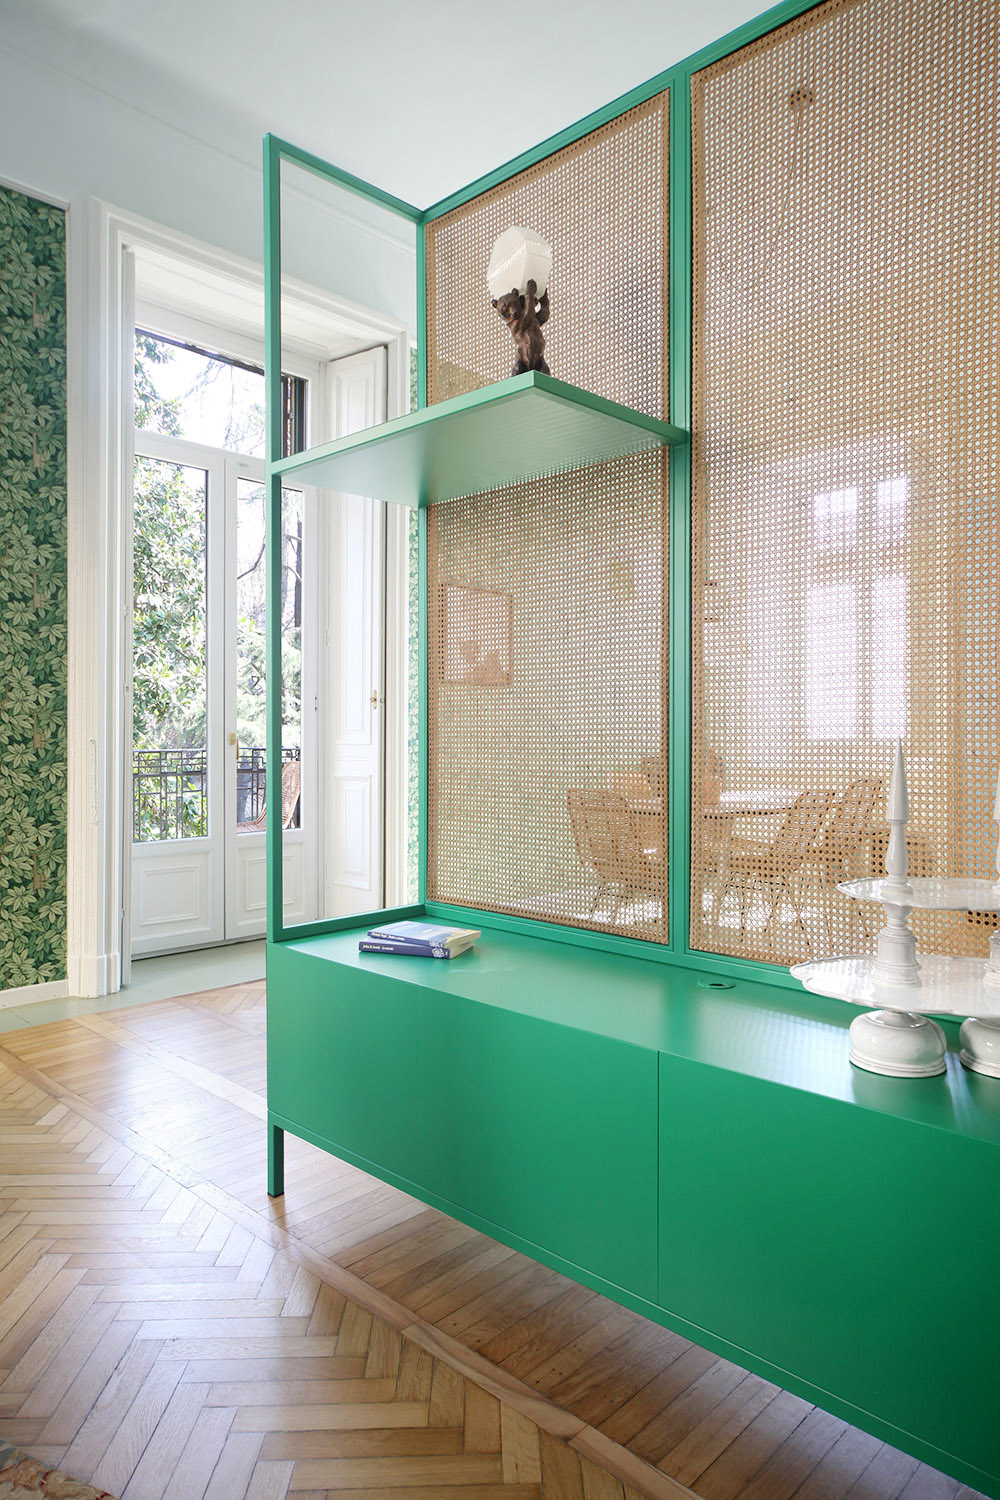 custom cane storage and room divider in lush green - milan apartment | coco kelley